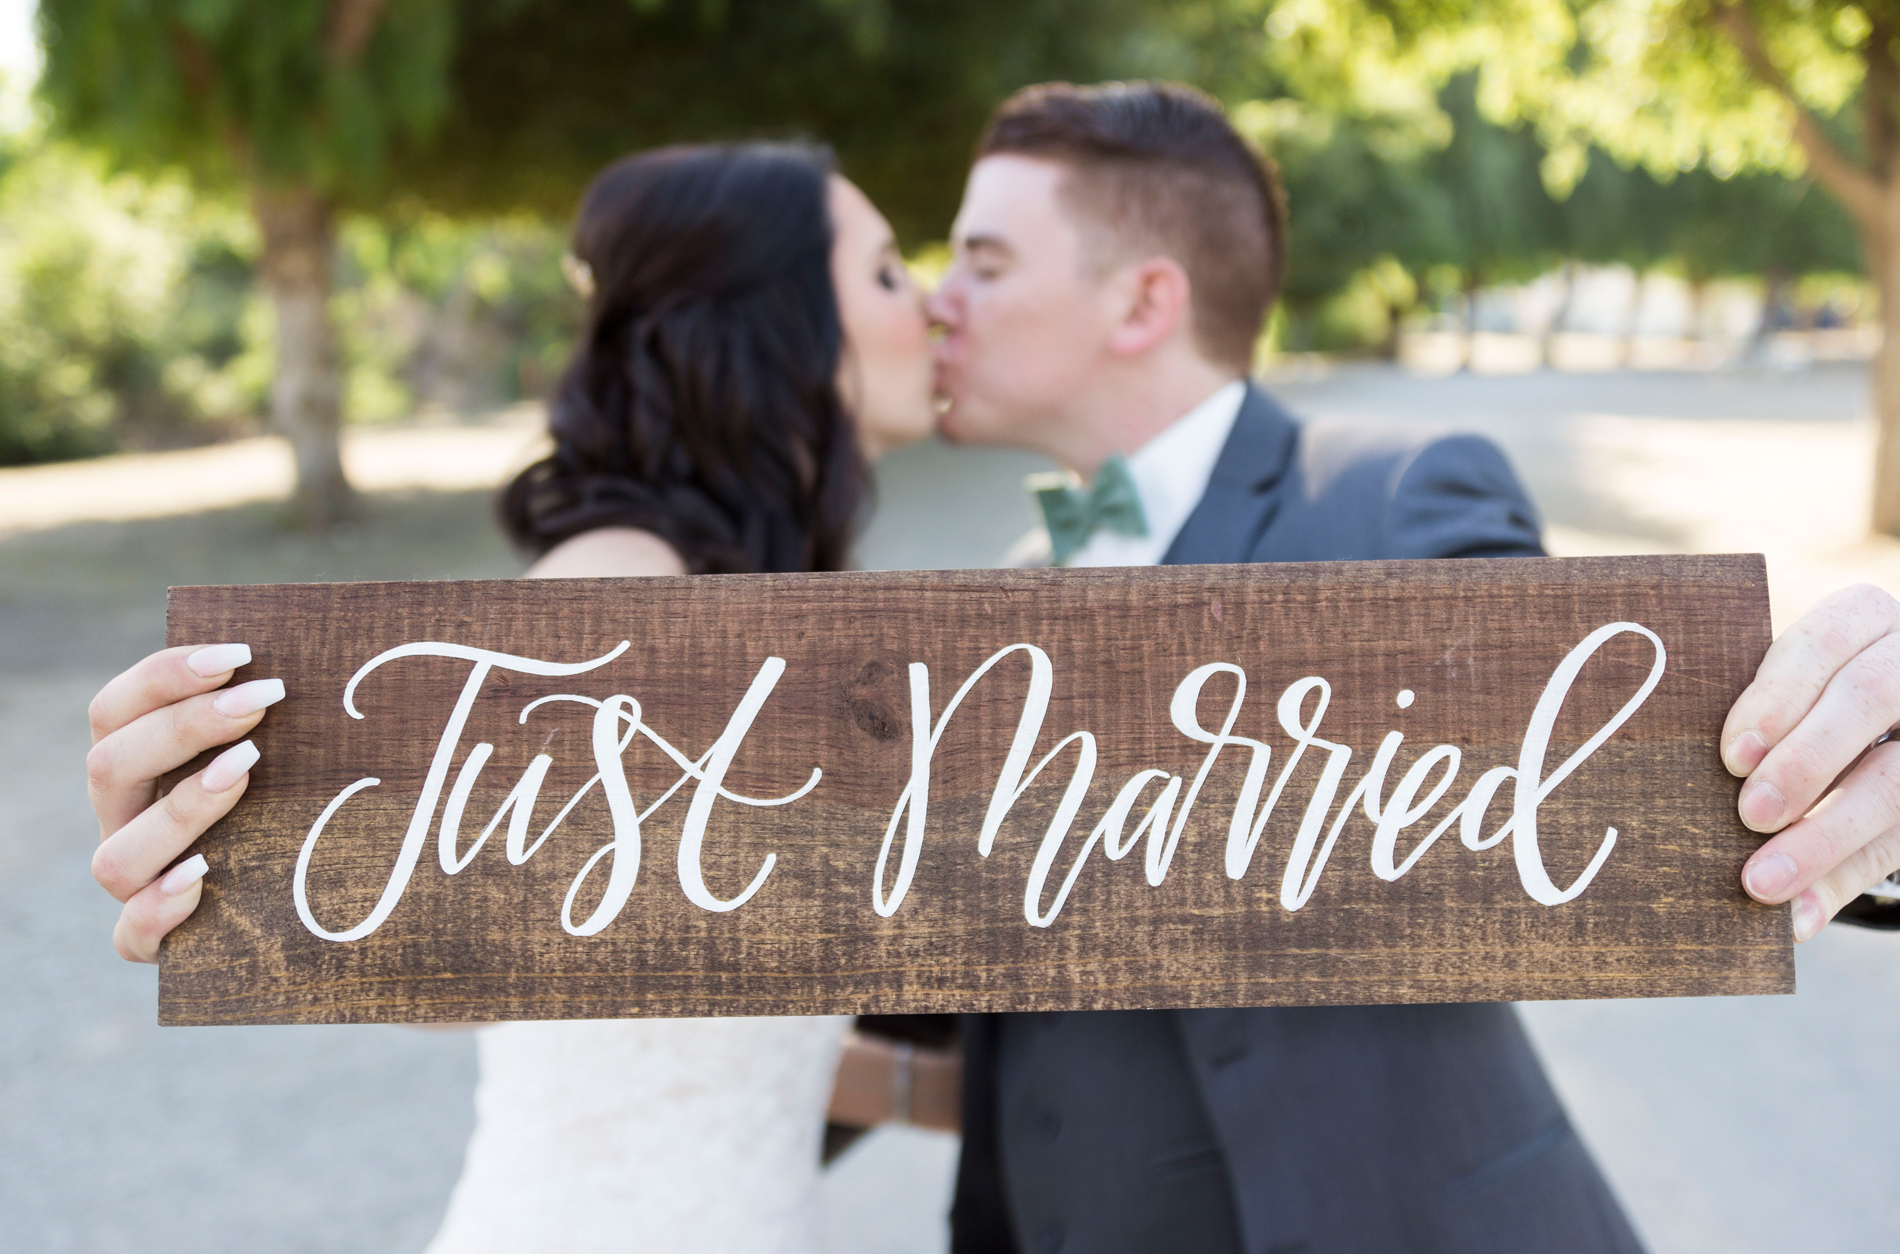 Wooden Just Married Sign - A Rustic-Vintage Glam McCoy Equestrian Center Wedding - Peterson Design & Photography